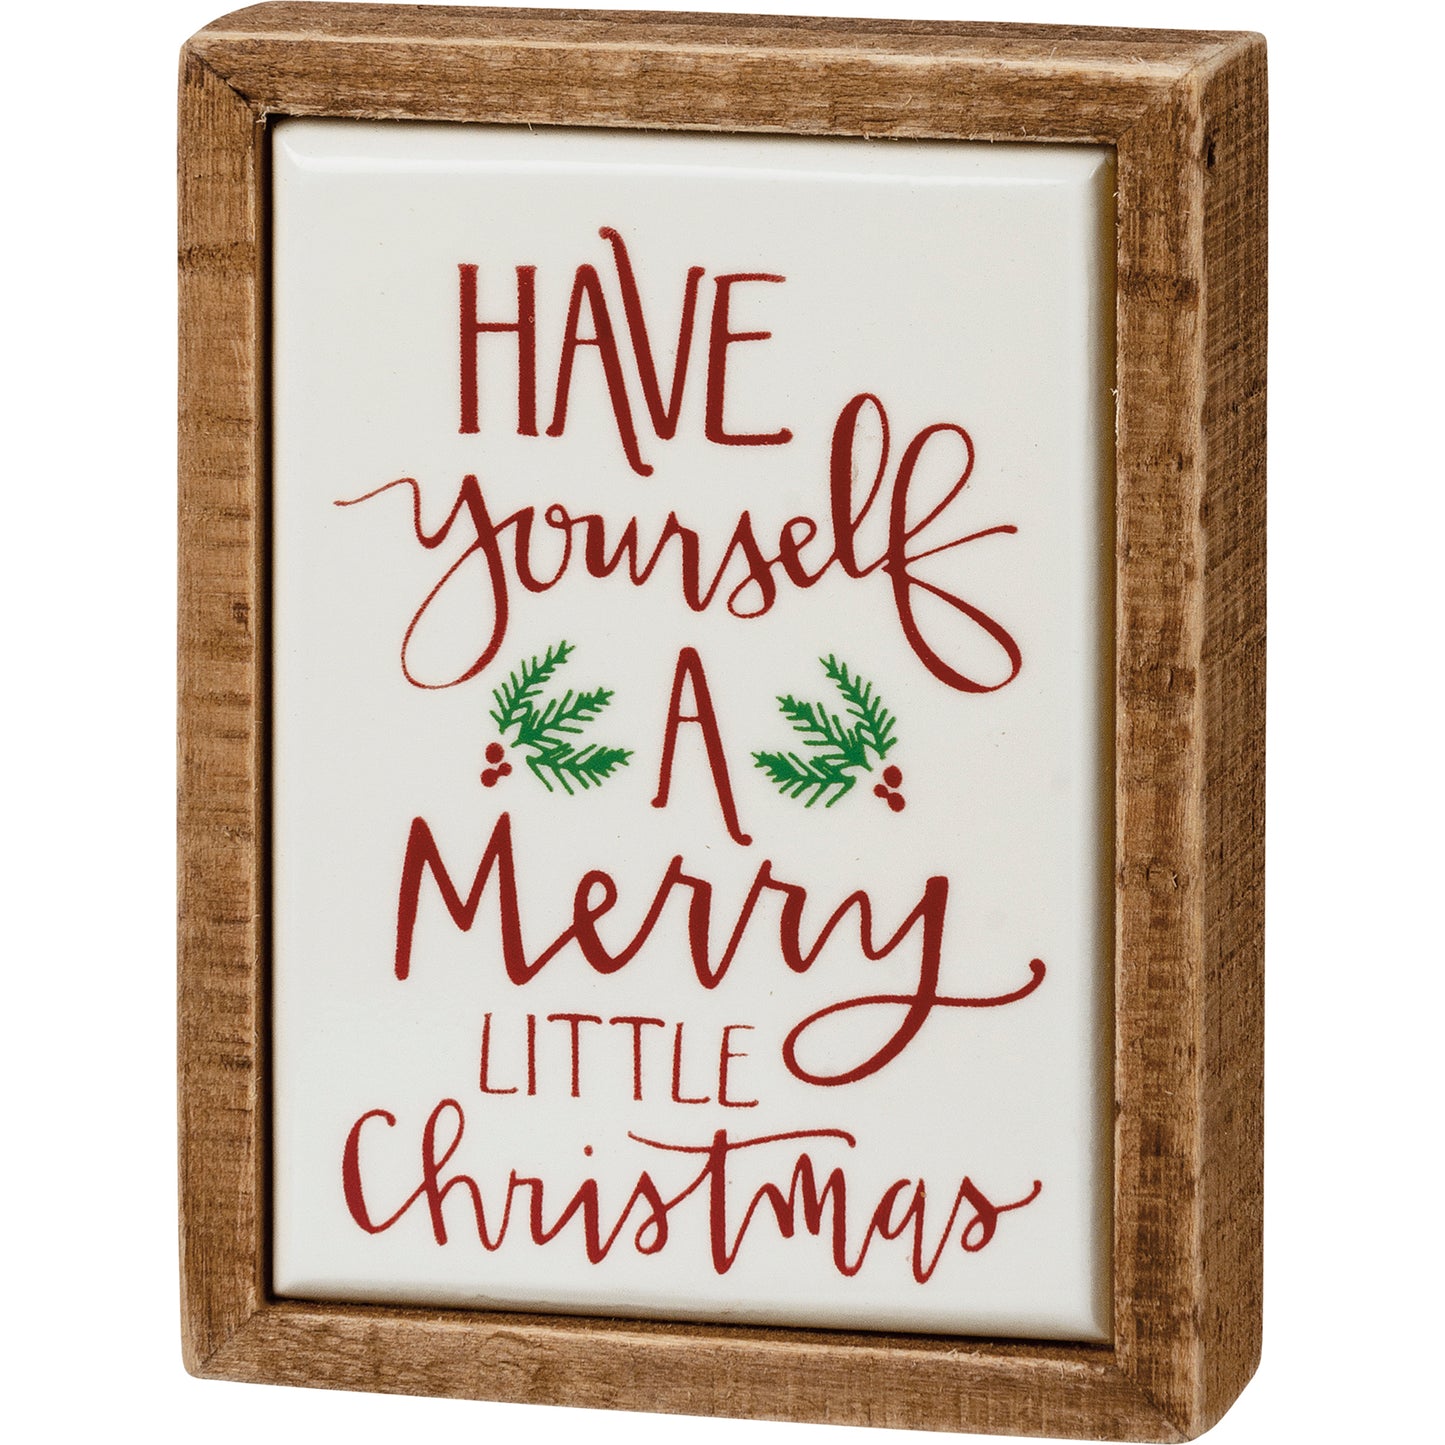 Have Yourself A Merry Christmas Mini Box Sign